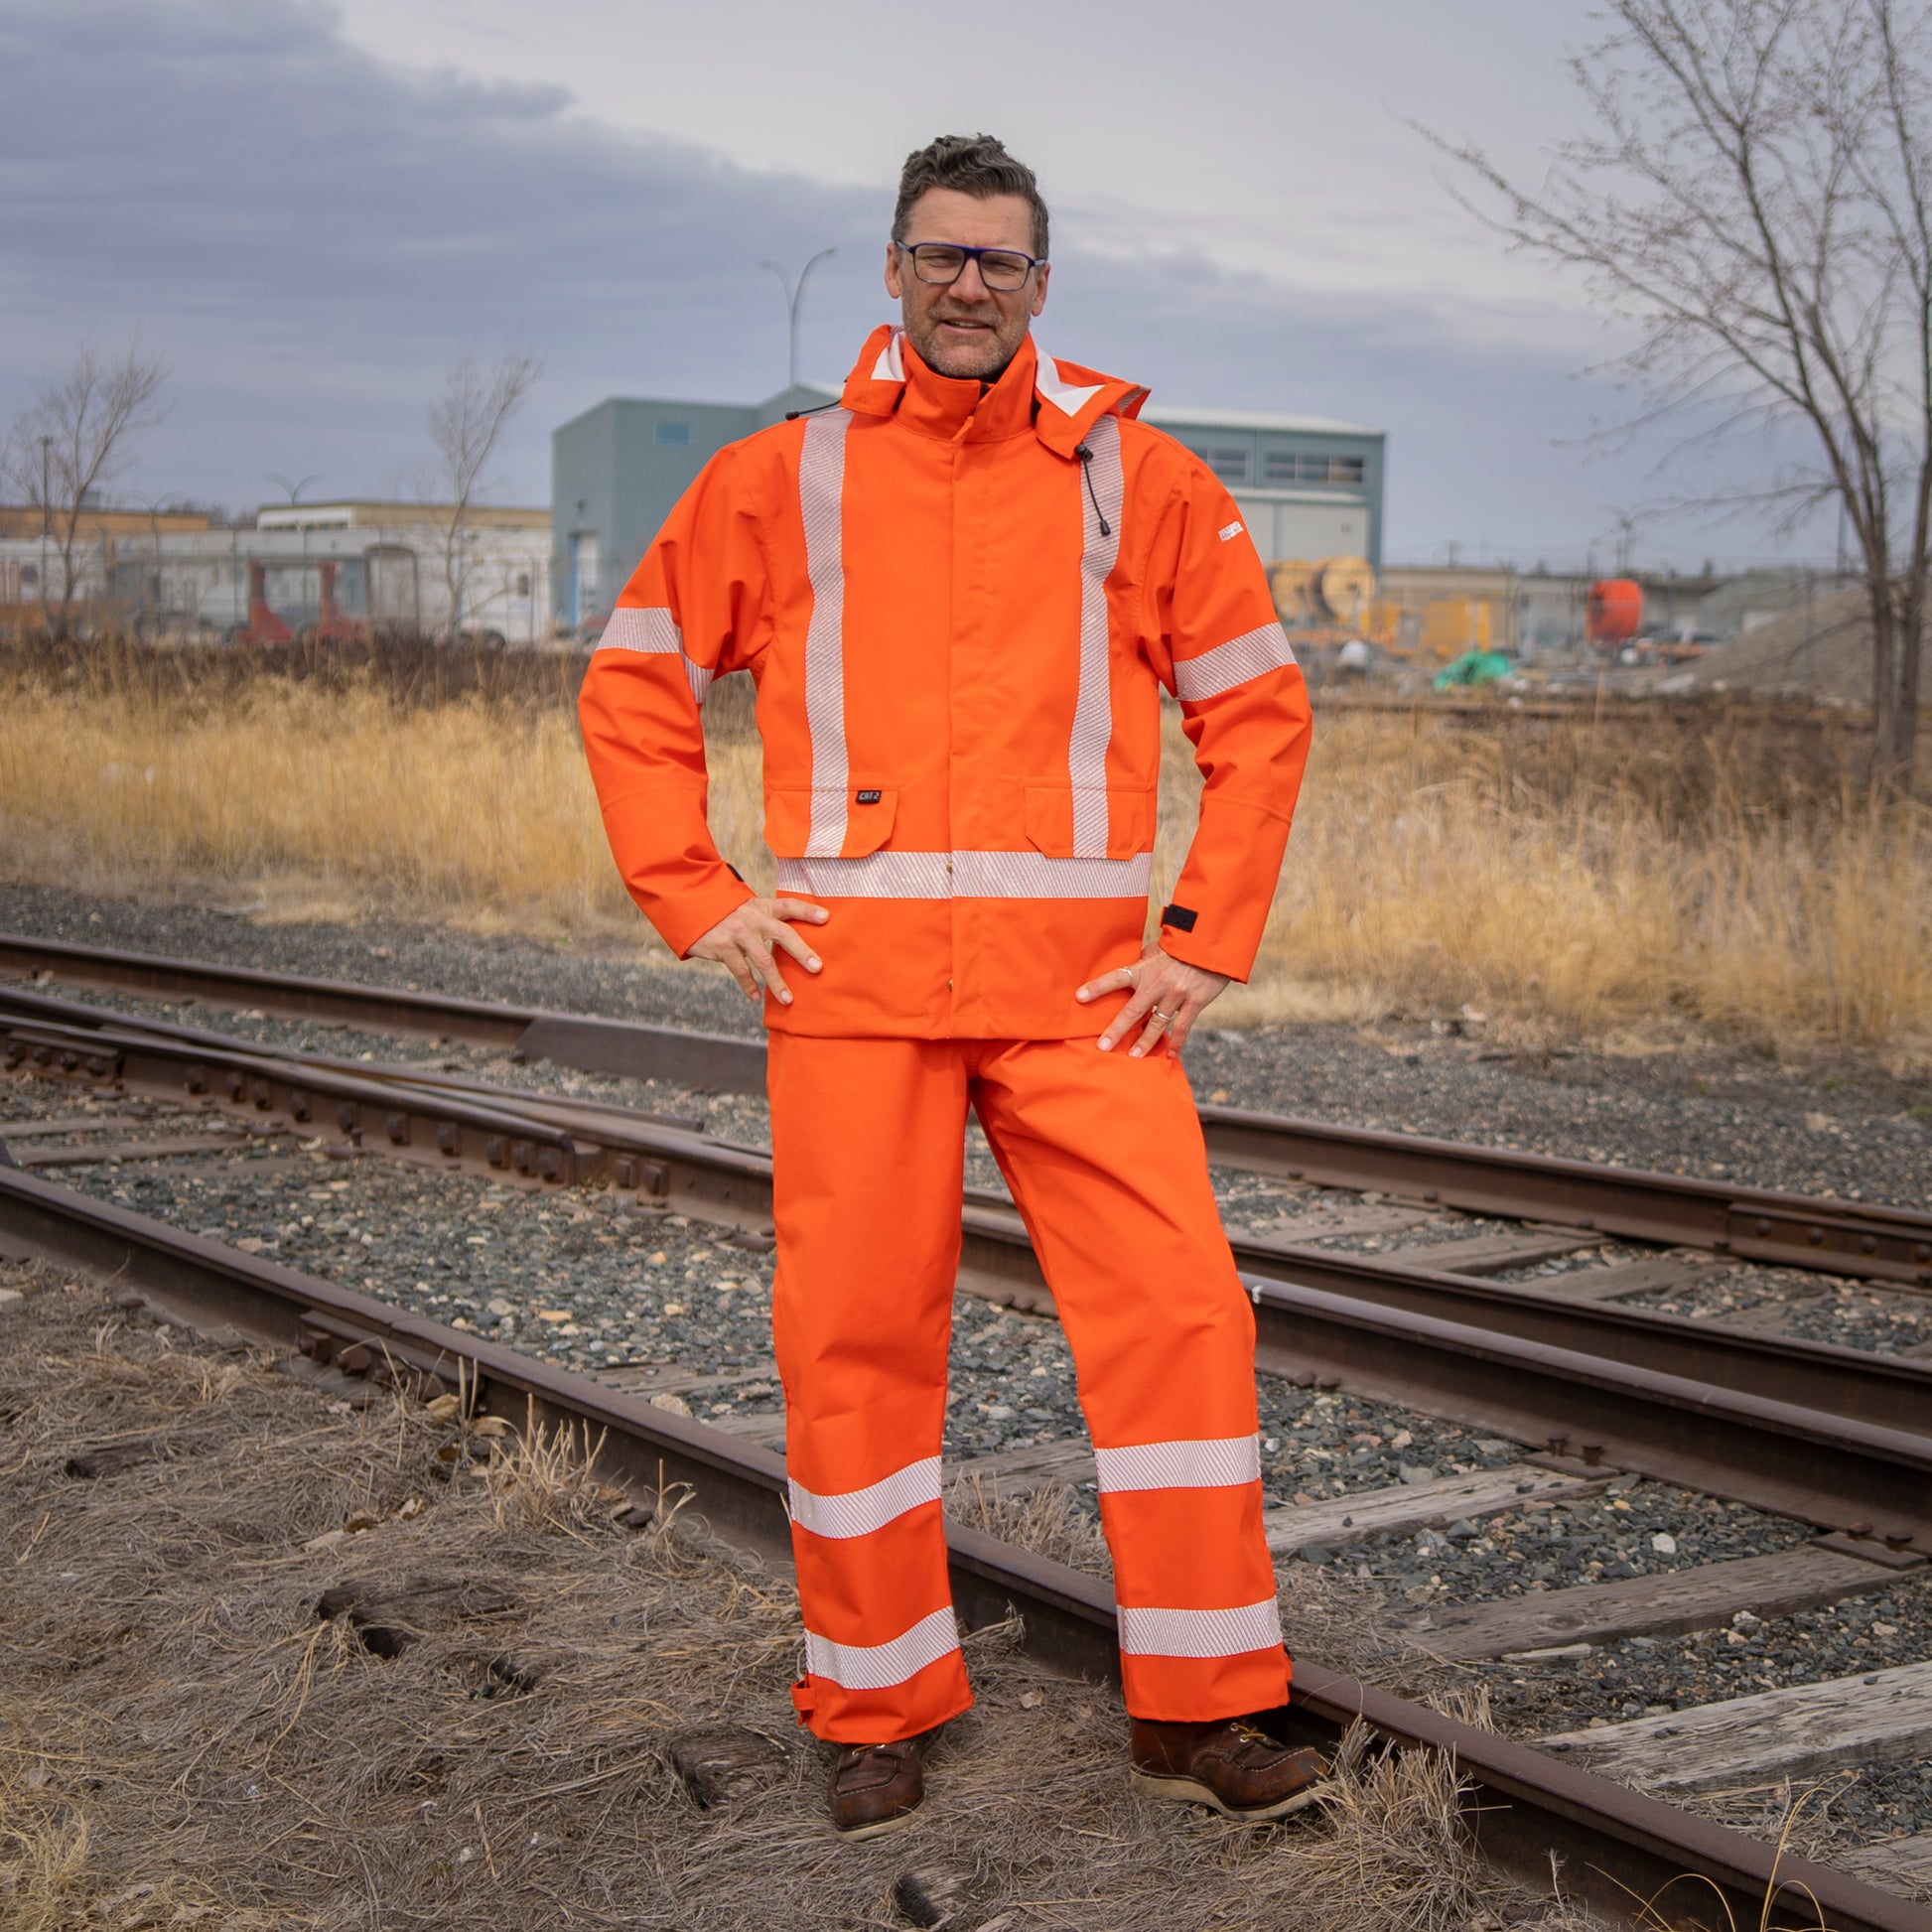 Image of MWG STORMSHIELD FR Rain Proof Jacket. MWG STORMSHIELD FR Rain Proof Jacket is bright orange in colour with silver segmented reflective tape on torso and arms to meet high-visibility standard CSA Z96-15. MWG STORMSHIELD FR Rain Jacket has two front pockets, a detachable hood, and velcro closures on cuffs. Model is wearing MWG STOMSHIELD FR rain jacket with orange MWG STORMSHIELD FR rain proof bib.